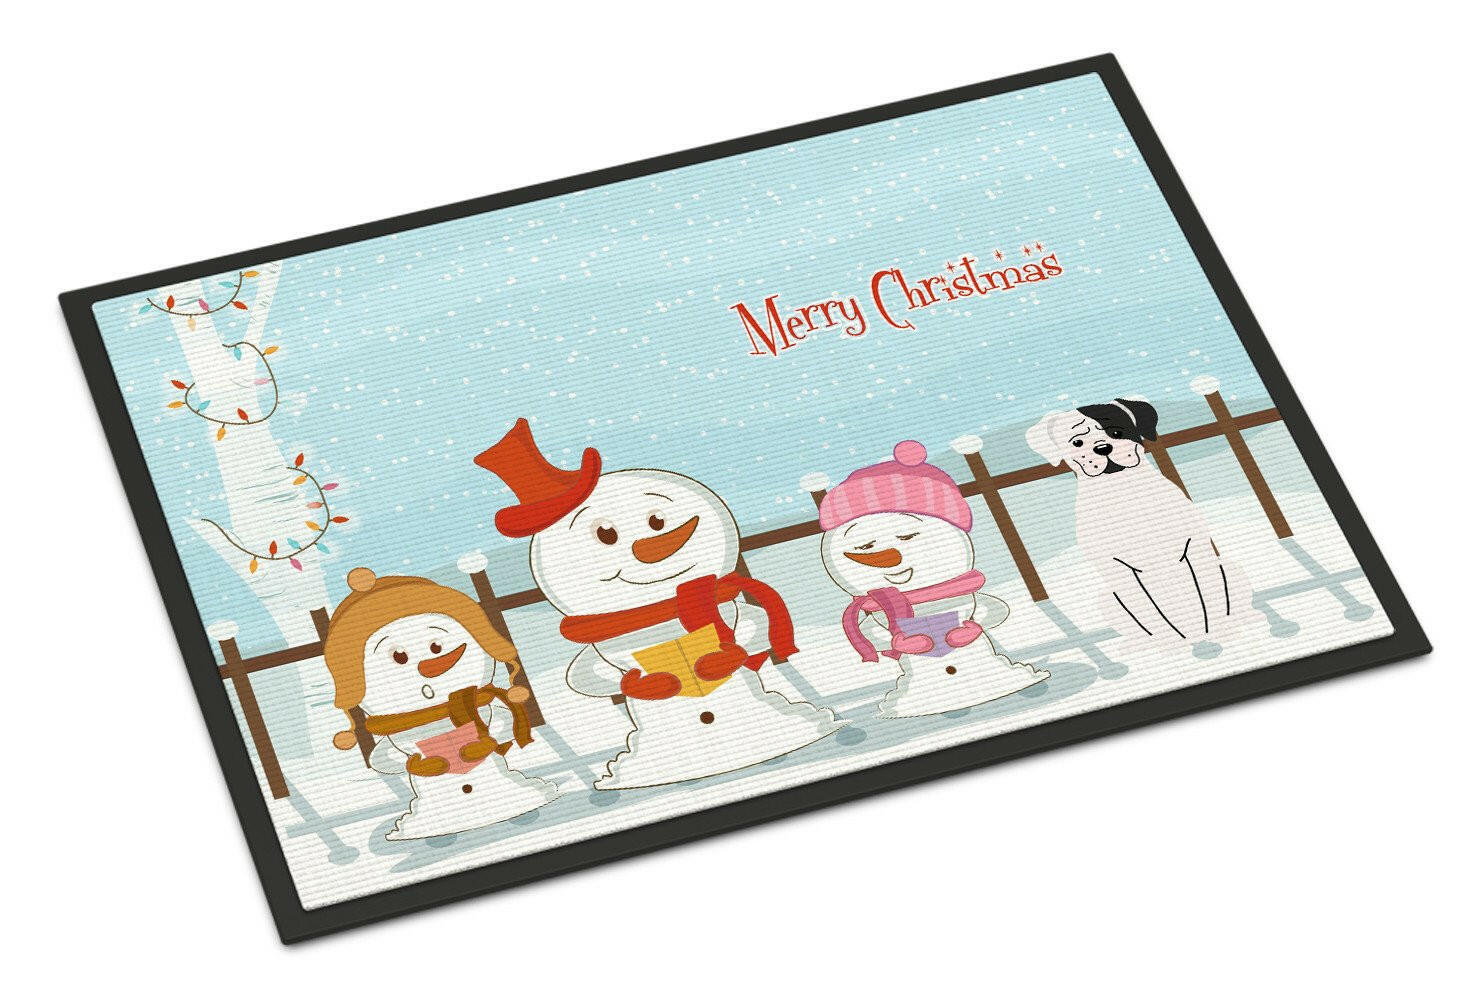 Merry Christmas Carolers White Boxer Cooper Indoor or Outdoor Mat 18x27 BB2445MAT - the-store.com